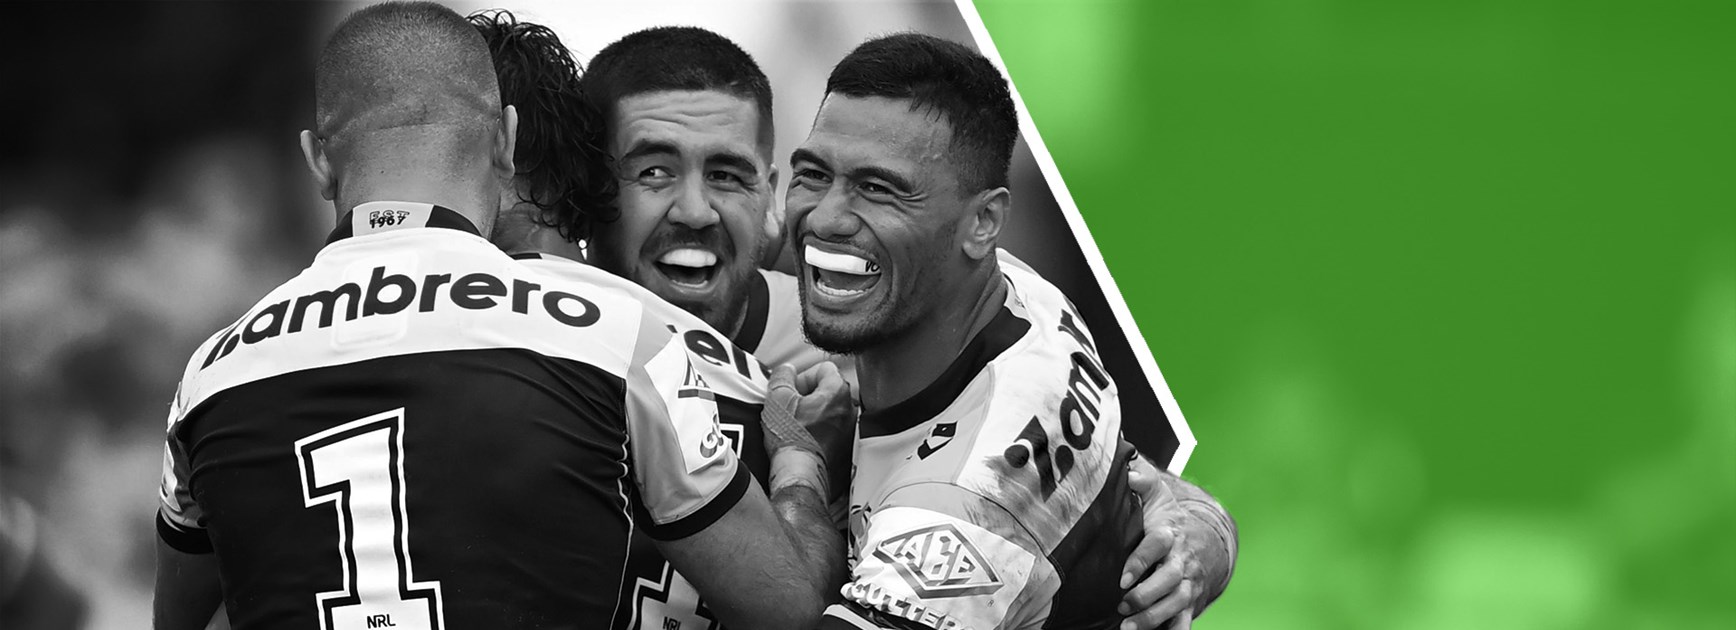 NRL Tipping: Expert tips for Round 14